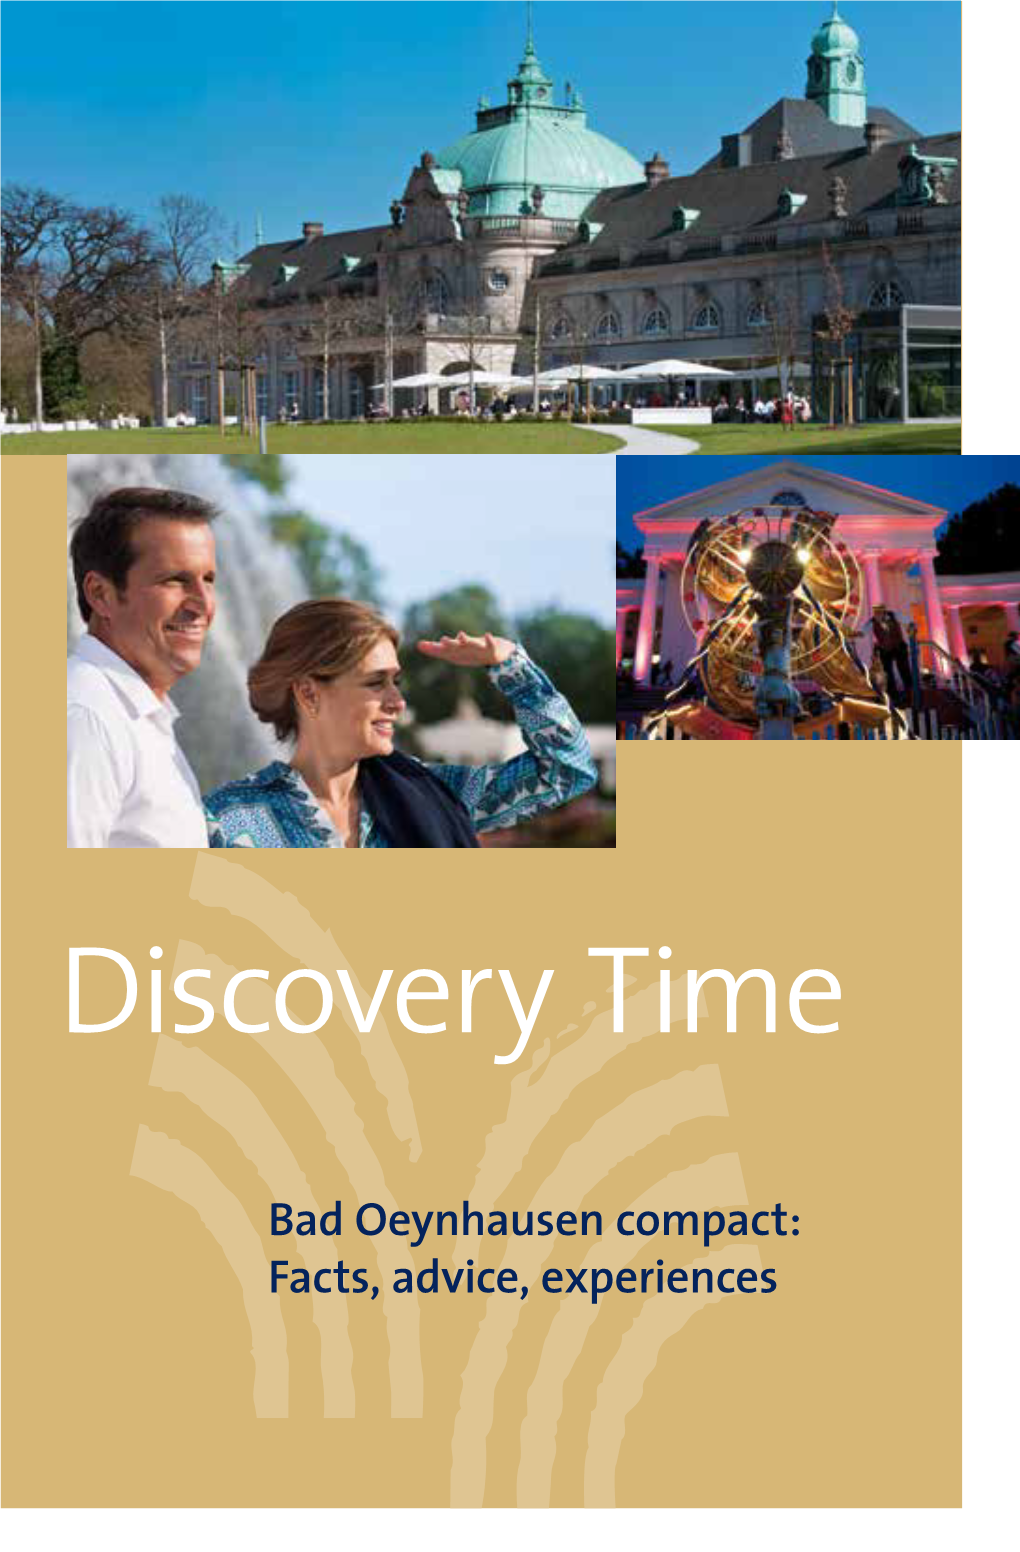 Bad Oeynhausen Compact: Facts, Advice, Experiences